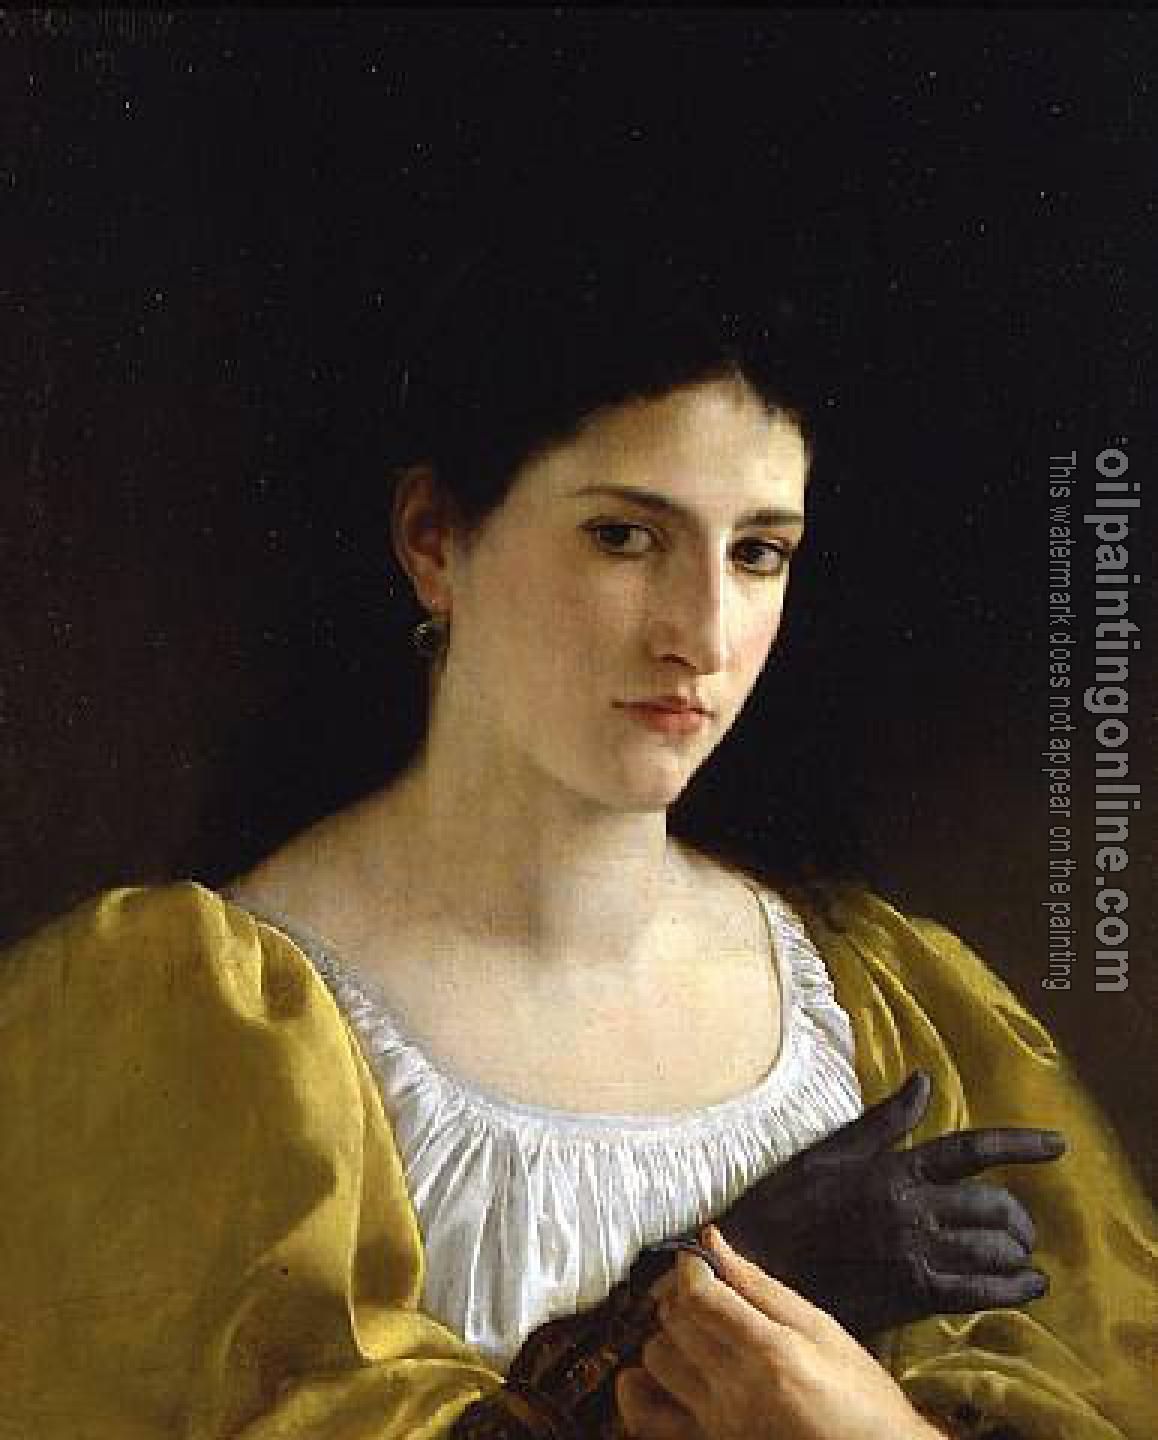 Bouguereau, William-Adolphe - Lady with Glove